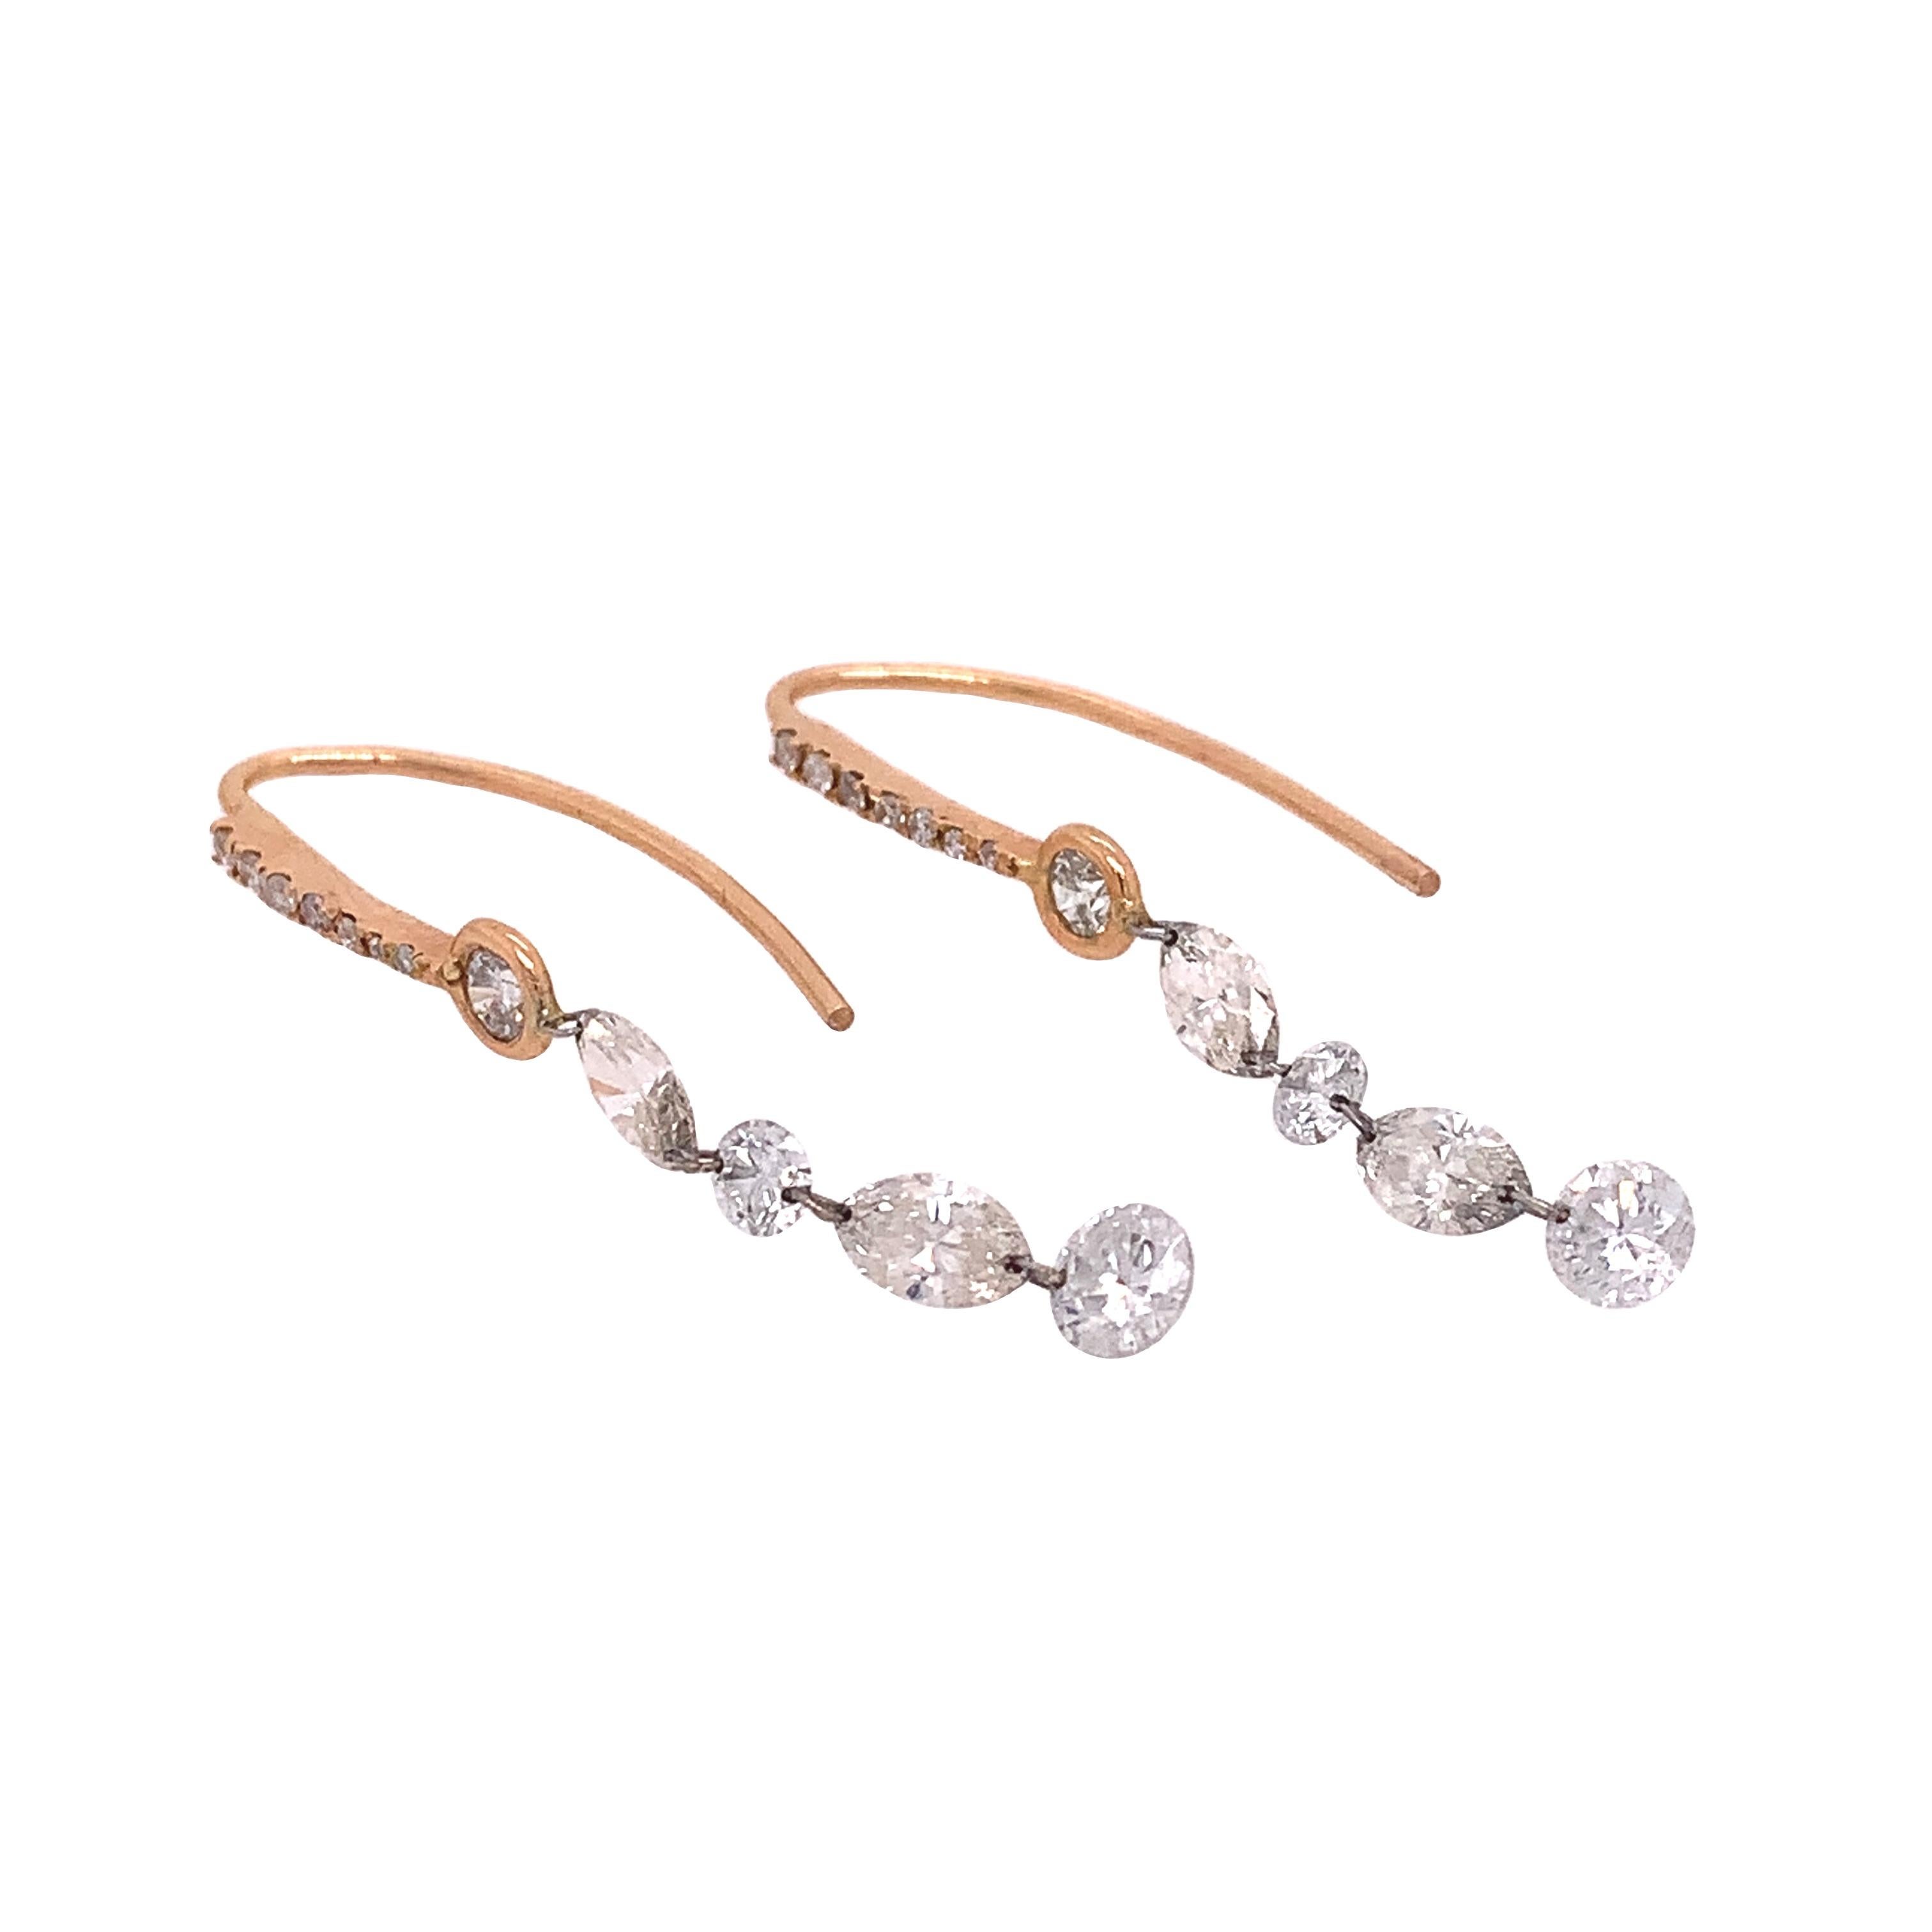 Dangling Diamond Collection,

In this collection Lucea releases their mixed shape Diamonds from 18K rose gold diamond pave bar by piercing them with a platinum ring letting them dangle freely.

Diamond; 1.62ct total weight.
All diamonds are G-H/SI